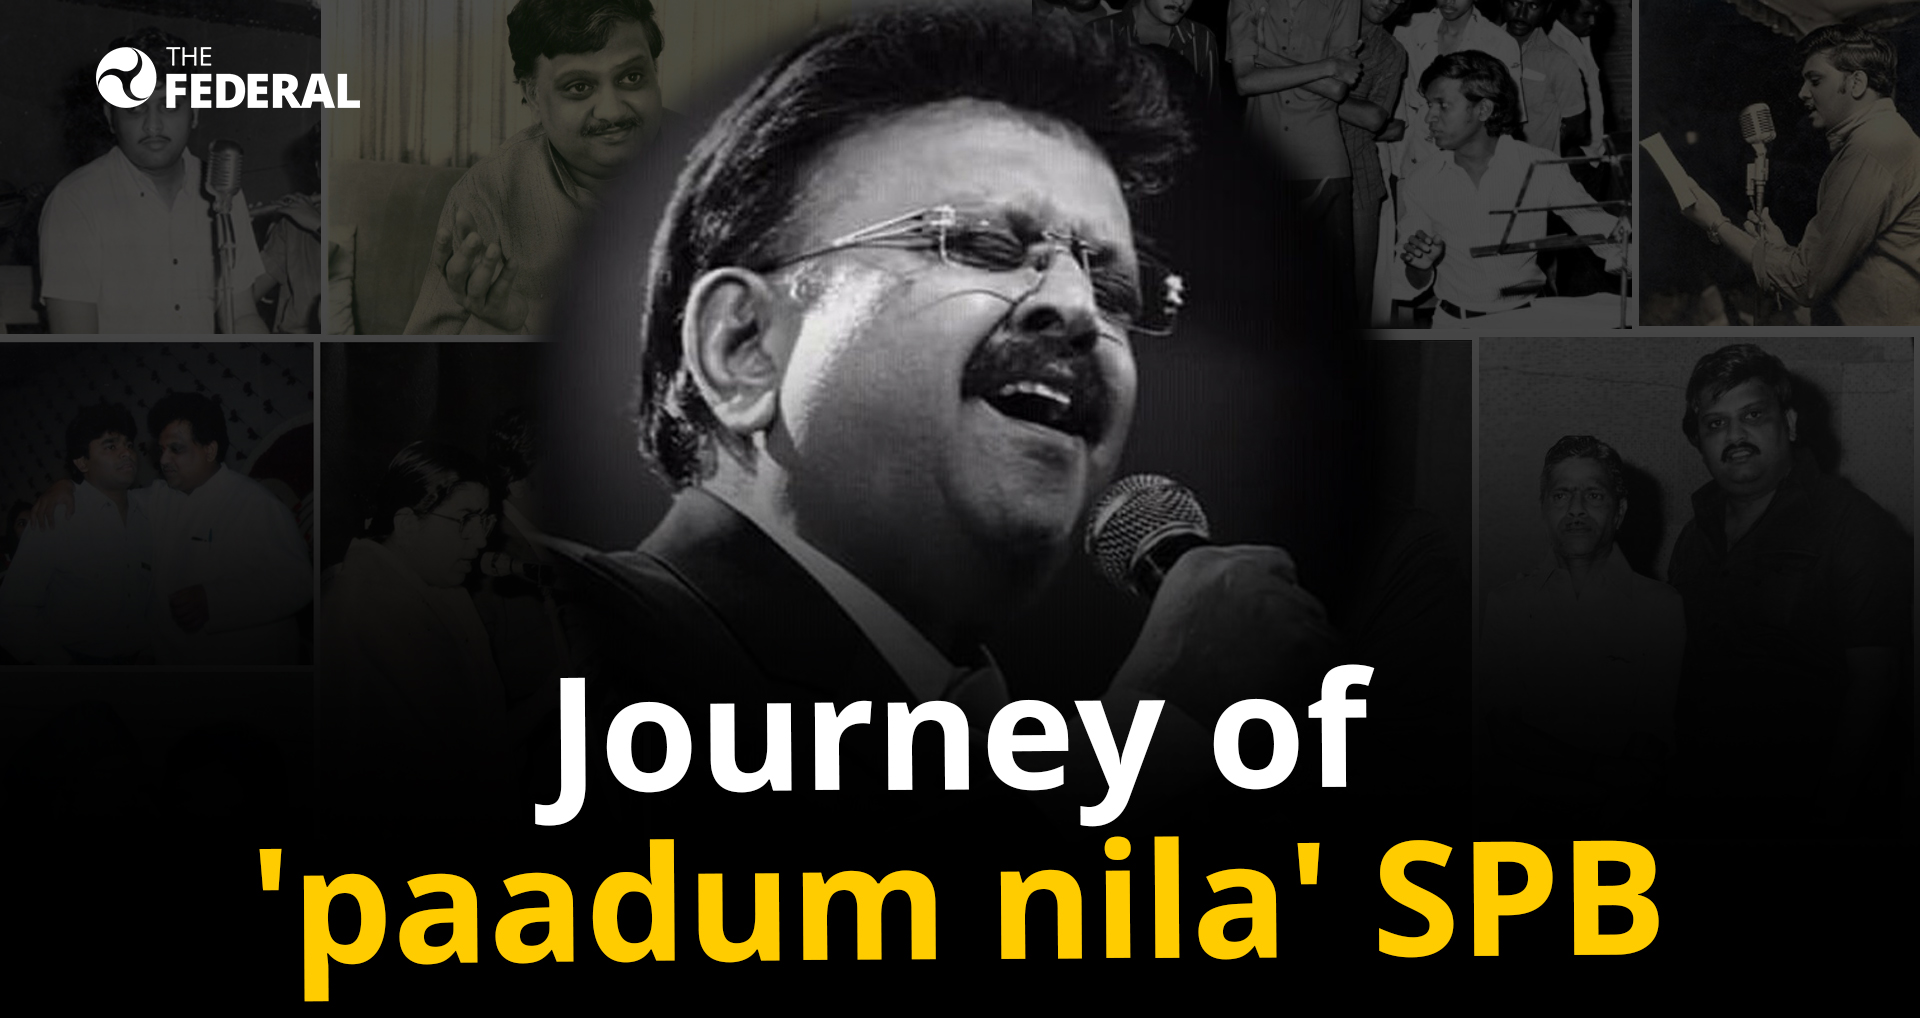 SPB departs, his melodies linger on